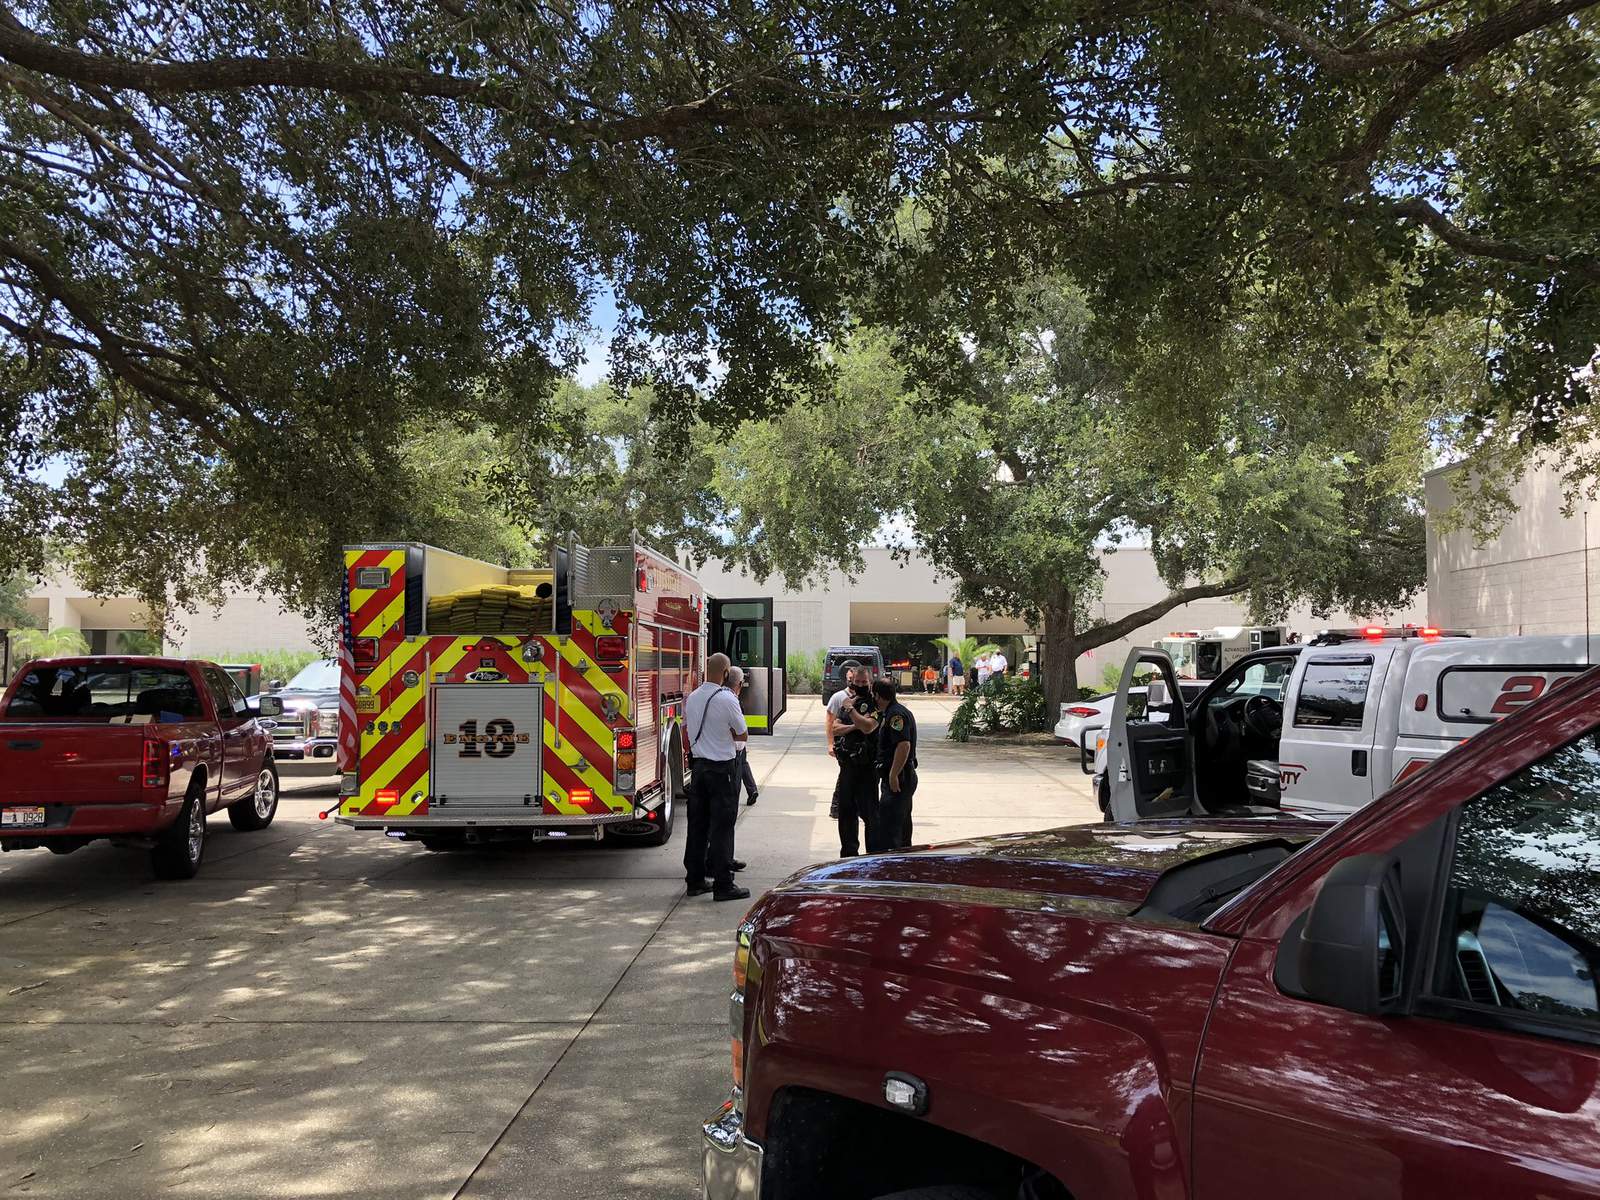 1 injured in explosion near hand sanitizer facility in Titusville